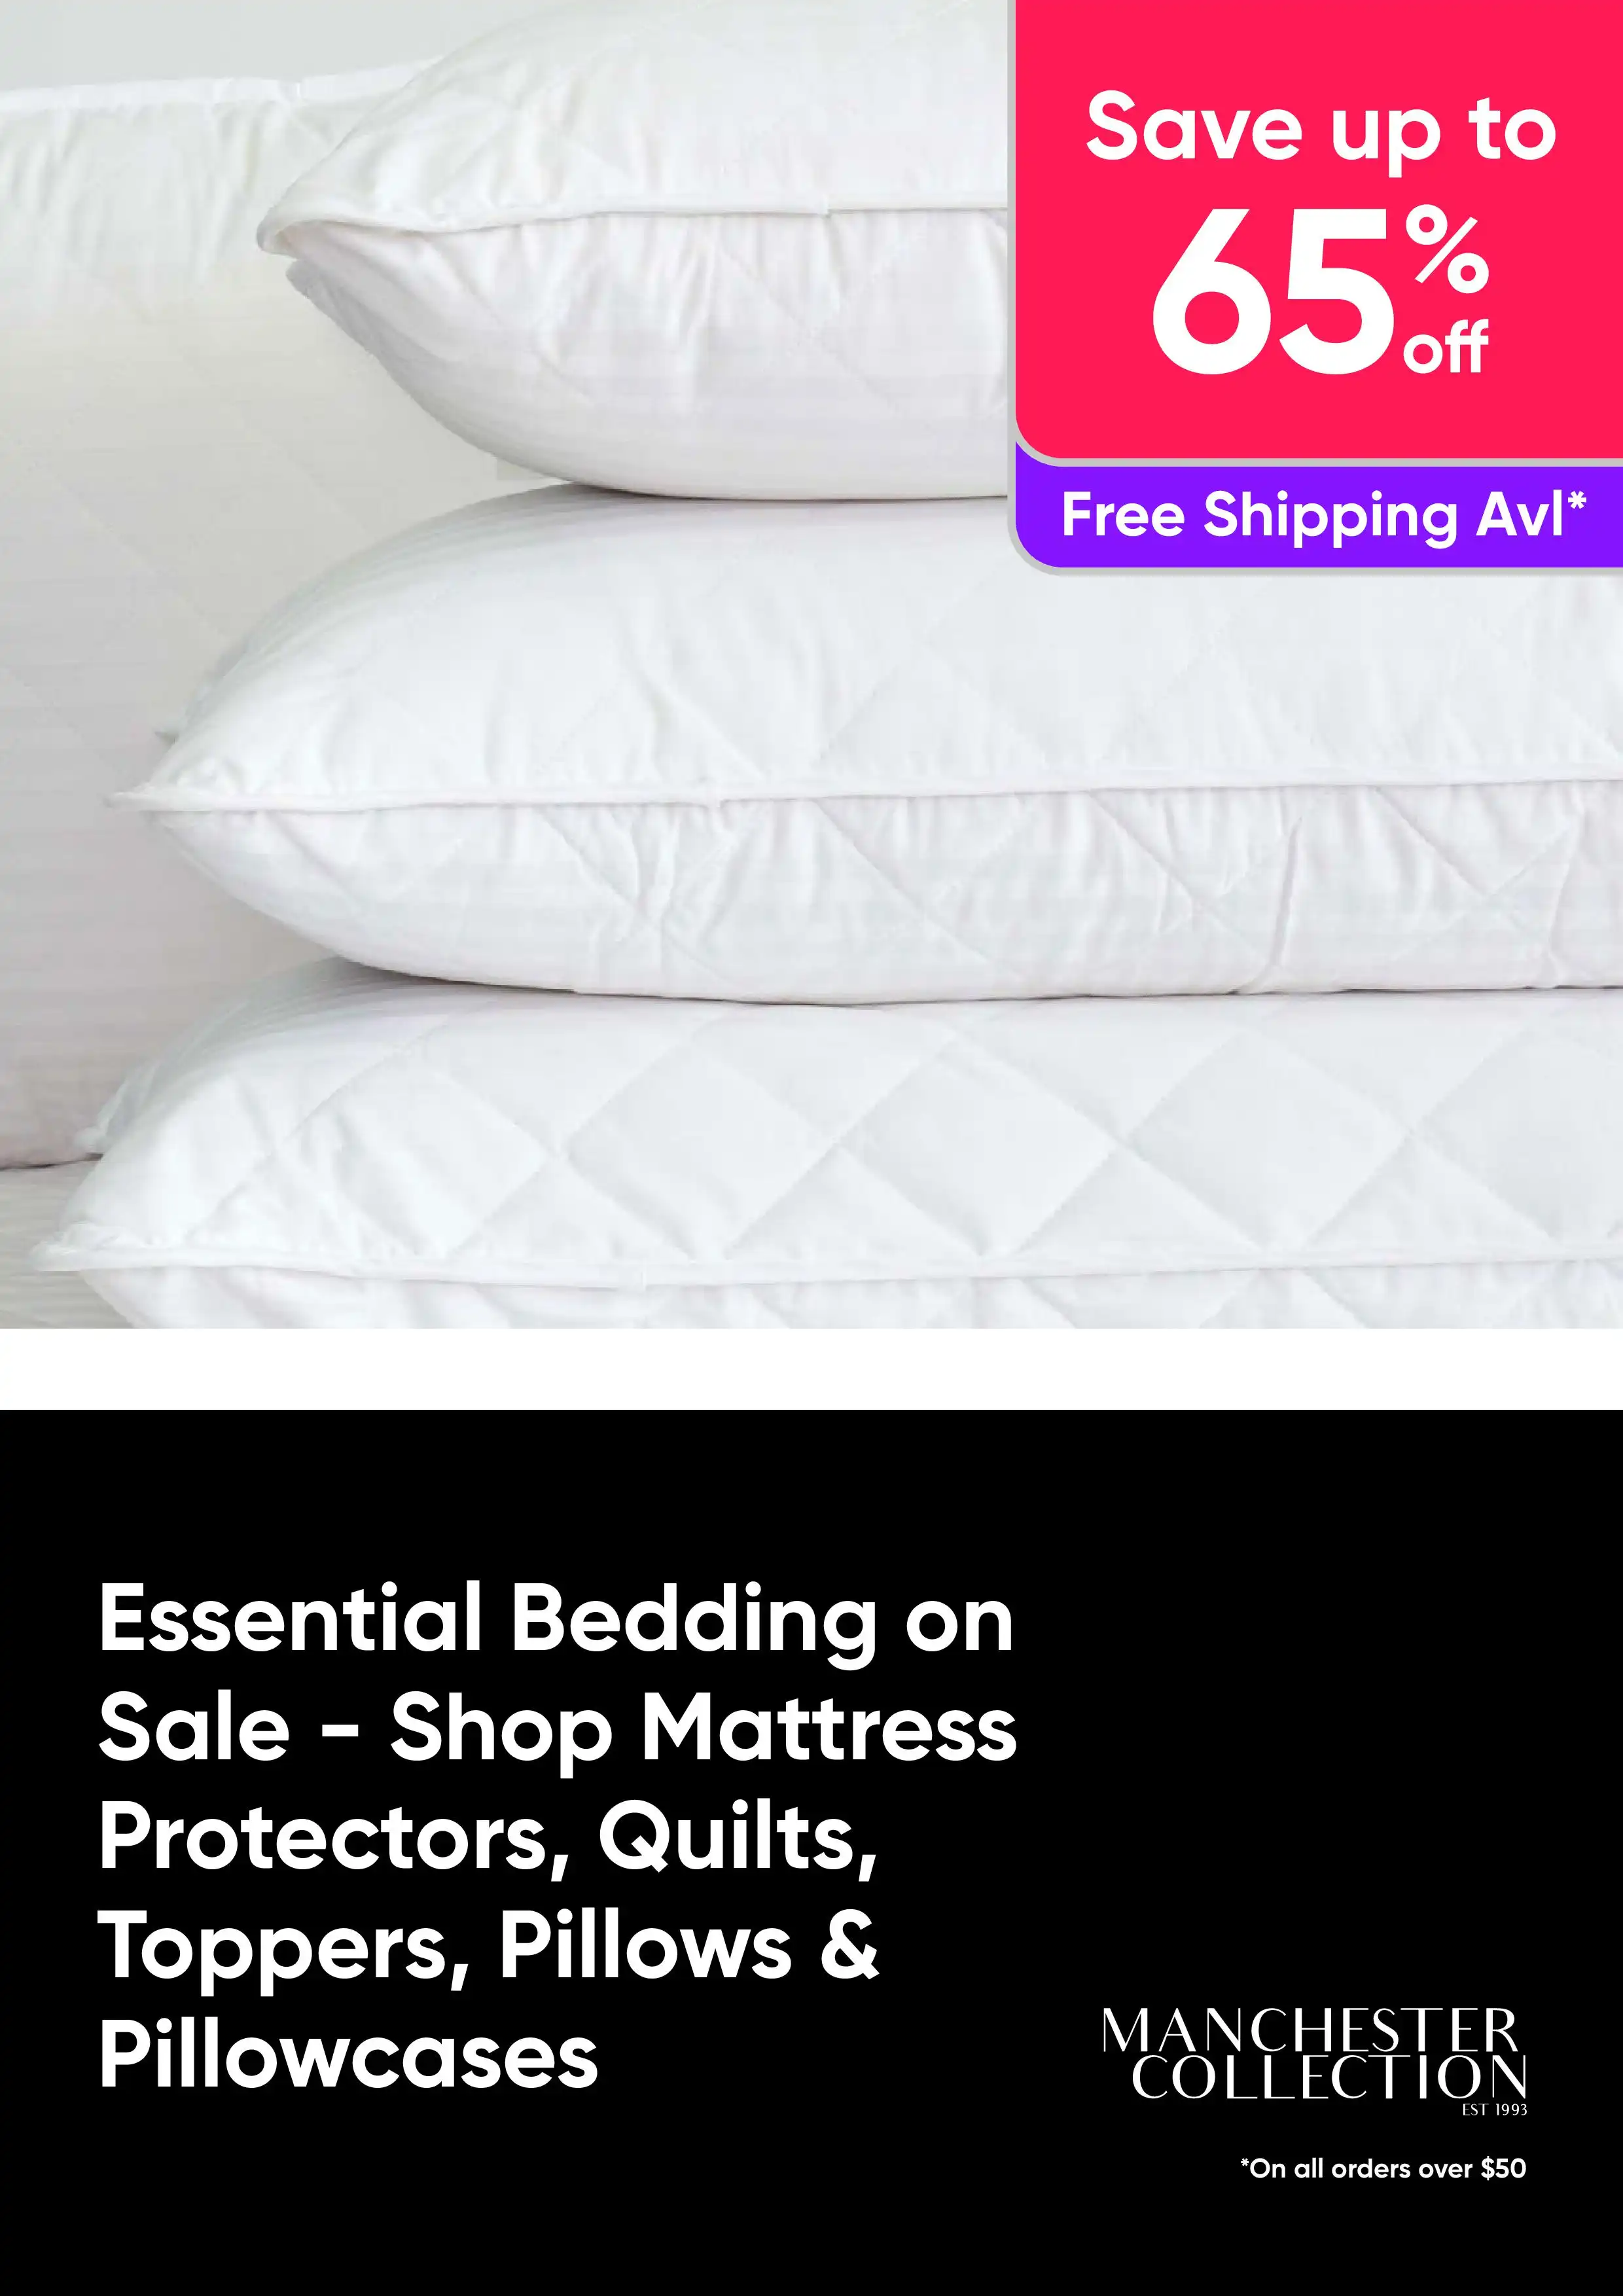 Essential Bedding on Sale up to 65% Off RRP - Shop Mattress Protectors